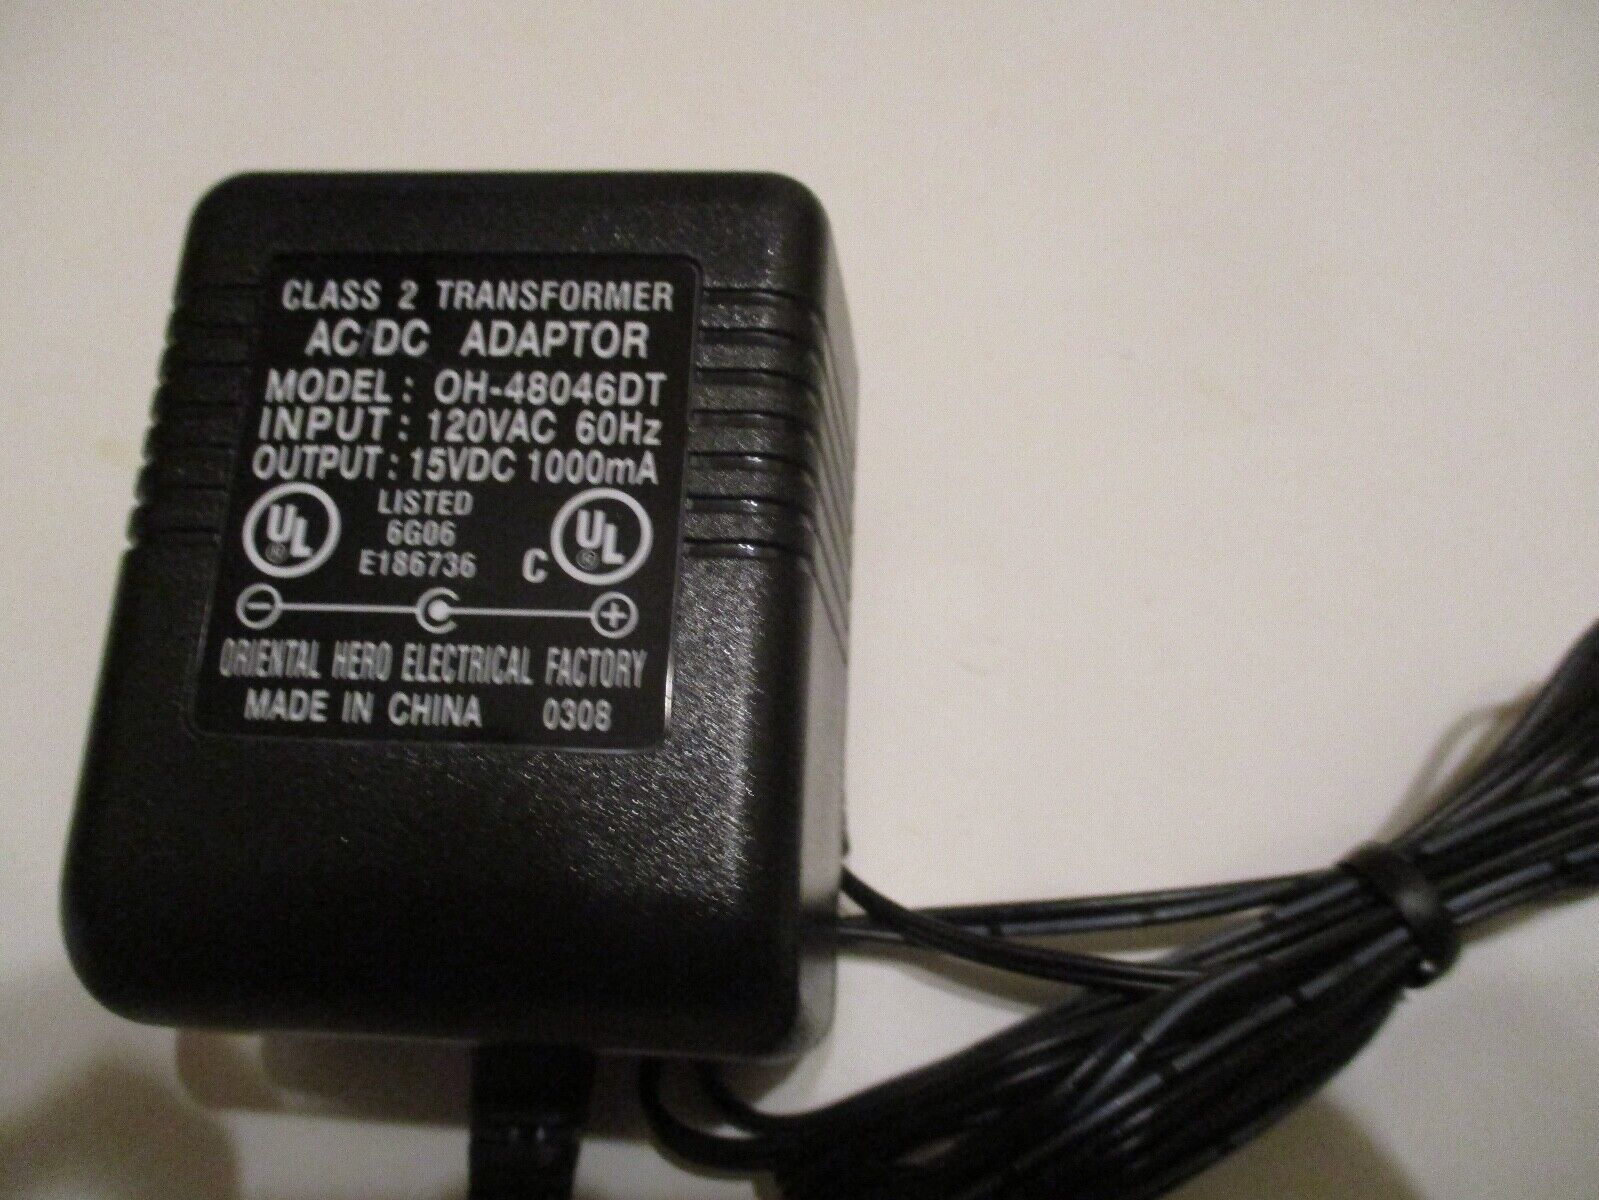 *Brand NEW* OH-480046dt 15VDC 1000mA AC DC ADAPTE POWER SUPPLY